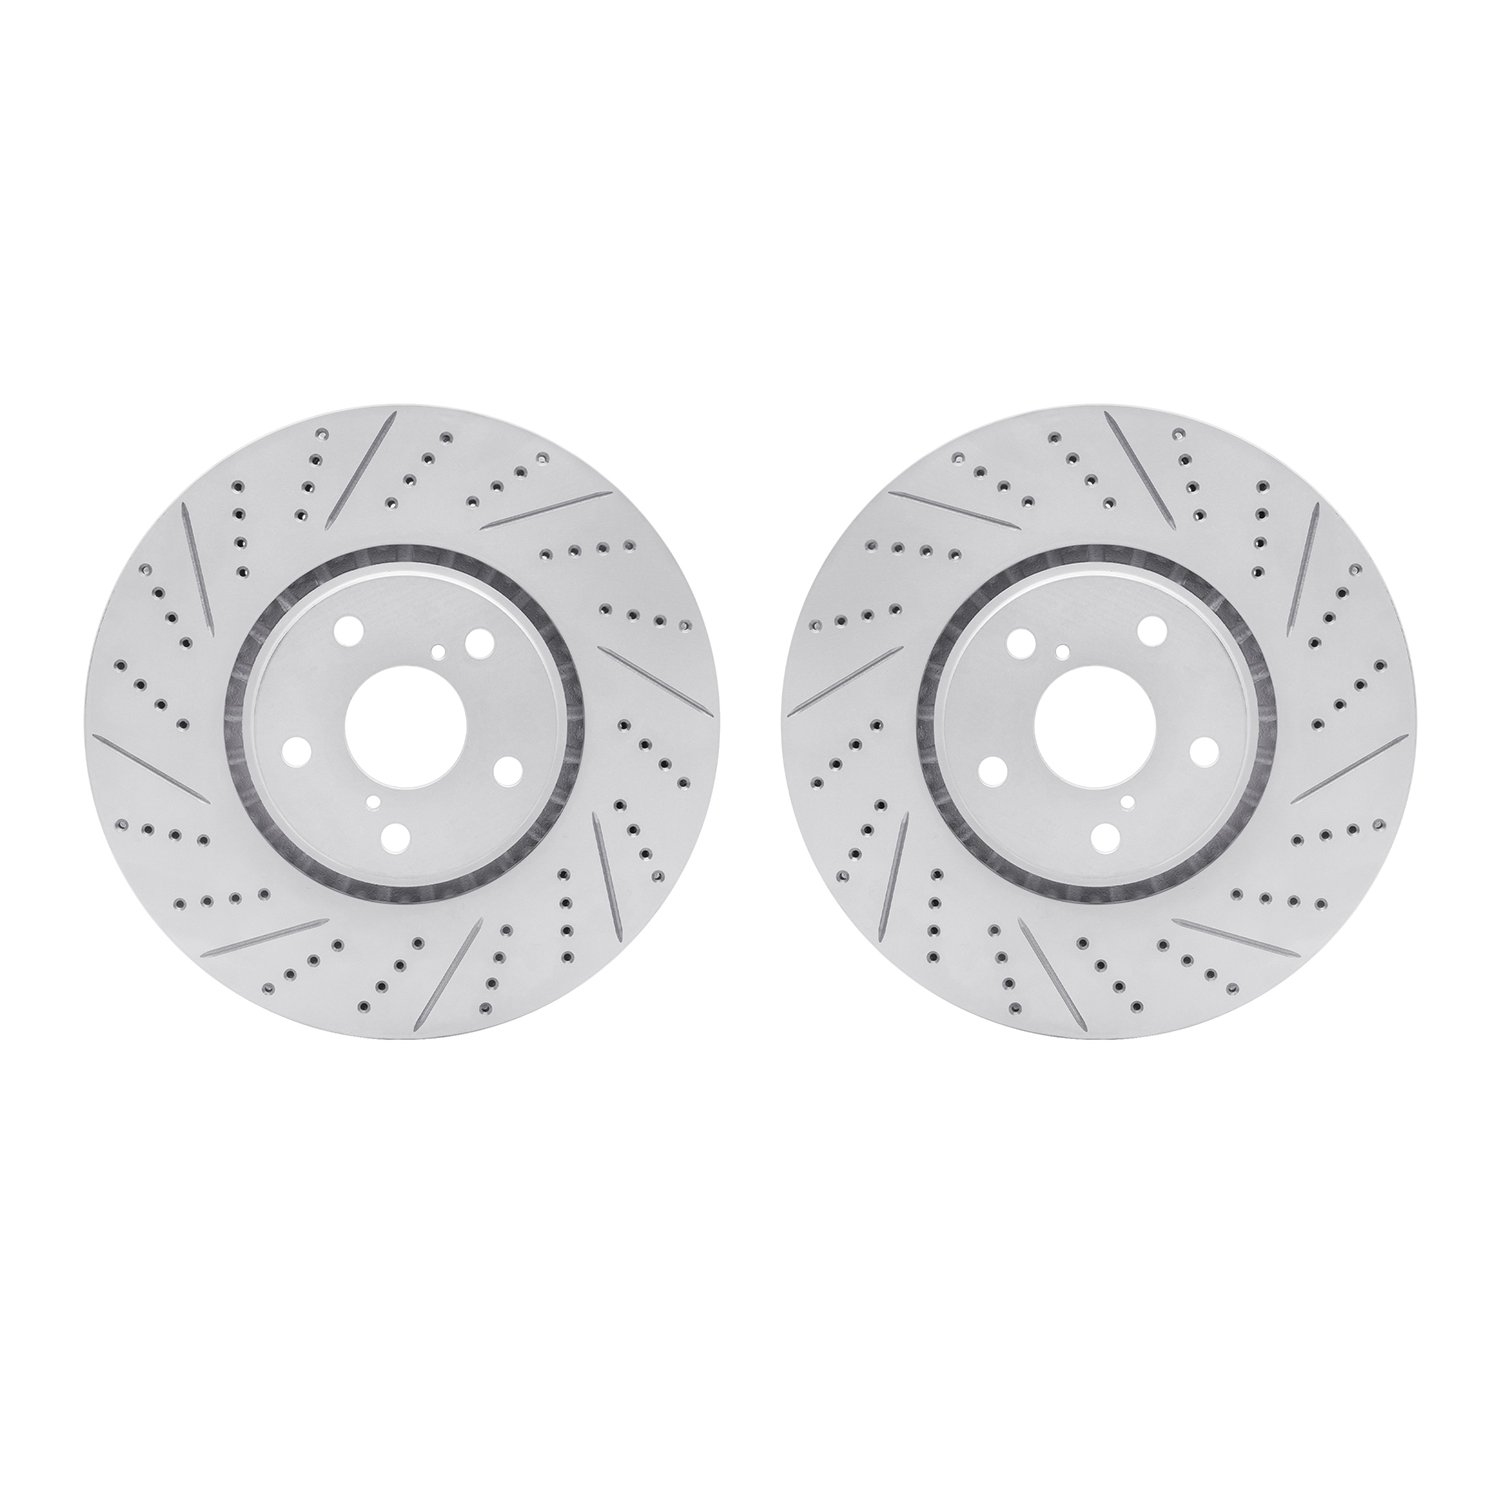 2002-75004 Geoperformance Drilled/Slotted Brake Rotors, 2007-2011 Lexus/Toyota/Scion, Position: Front